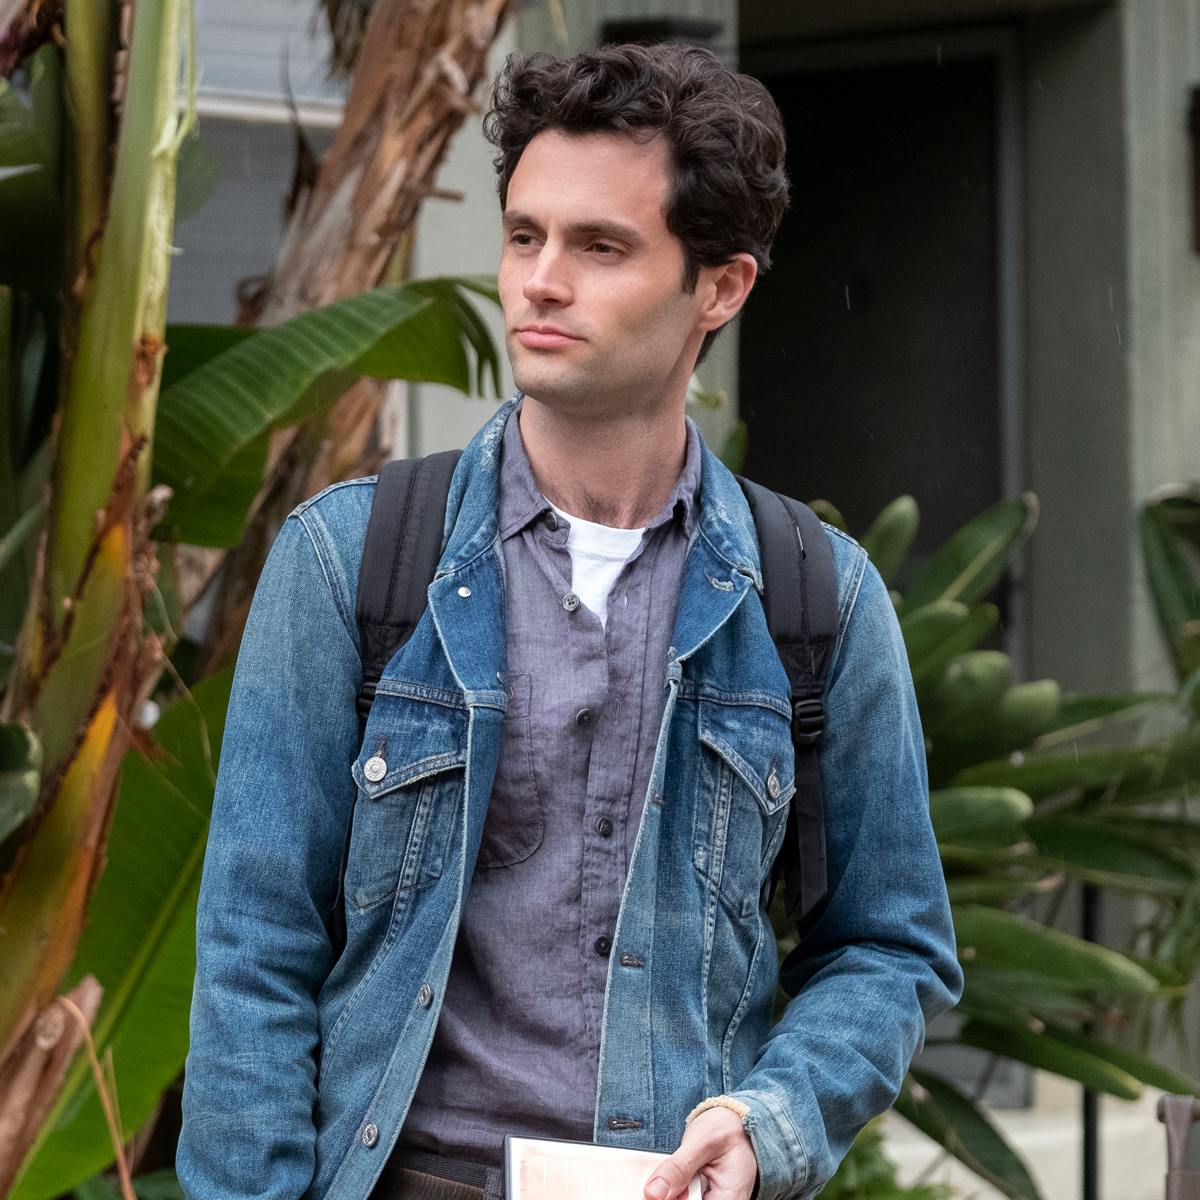 Penn Badgley News, Pictures, and Videos - E! Online